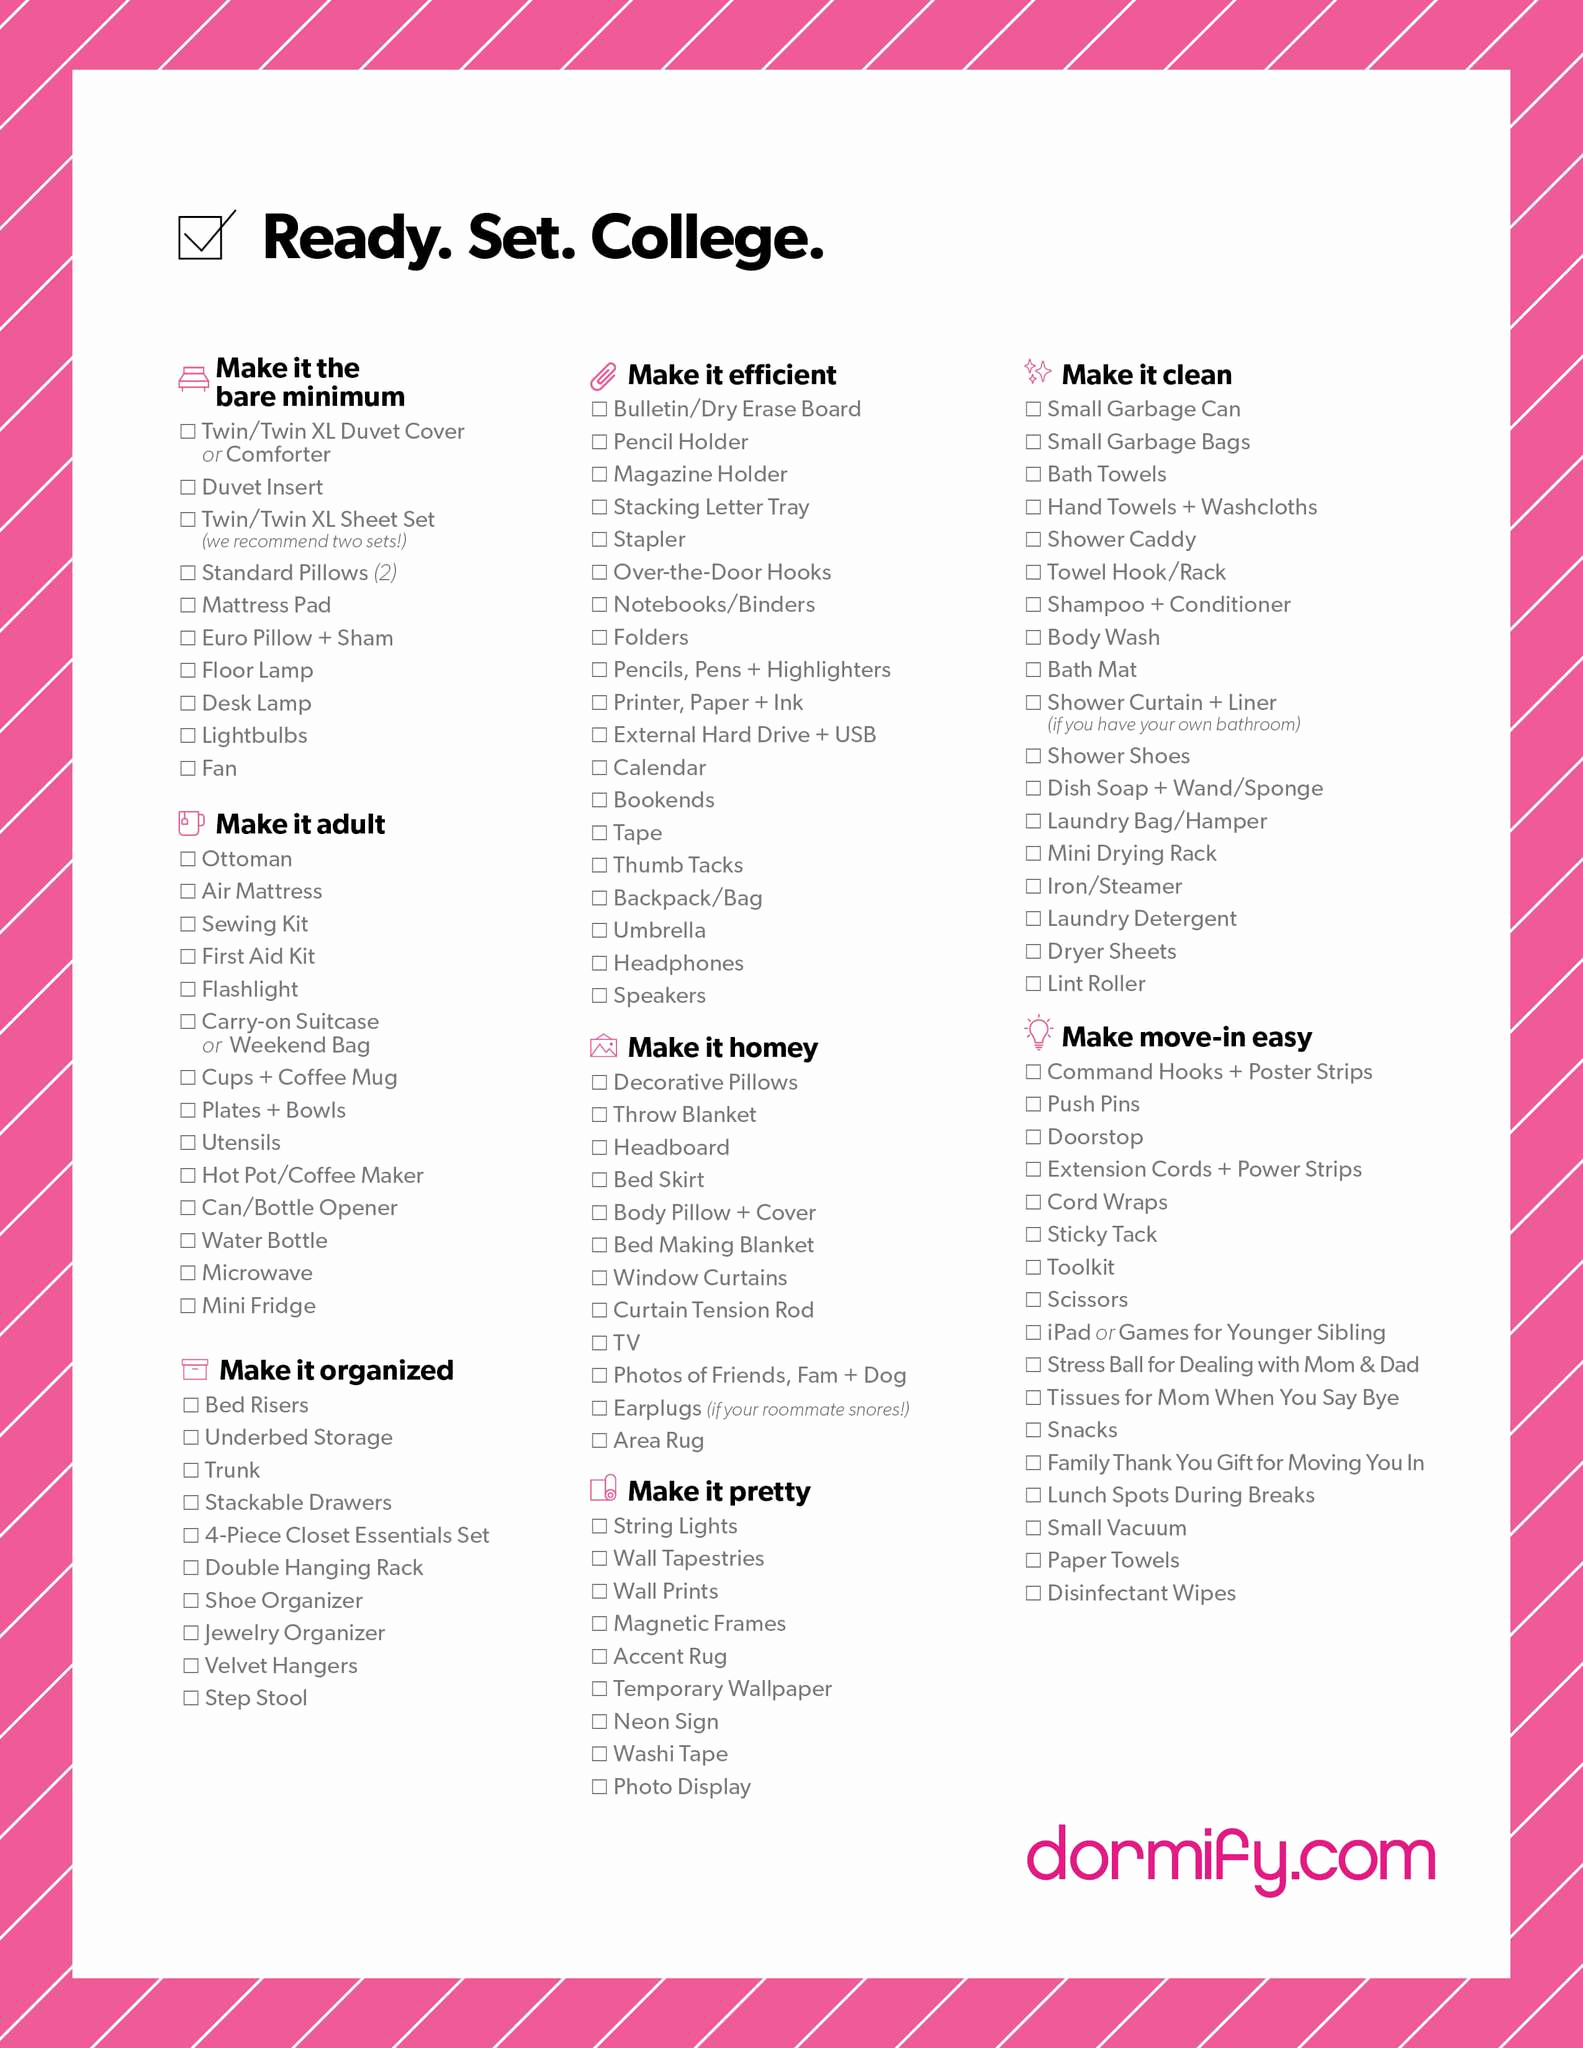 College Packing List Pdf New College Dorm Apartment Checklist – Dormify